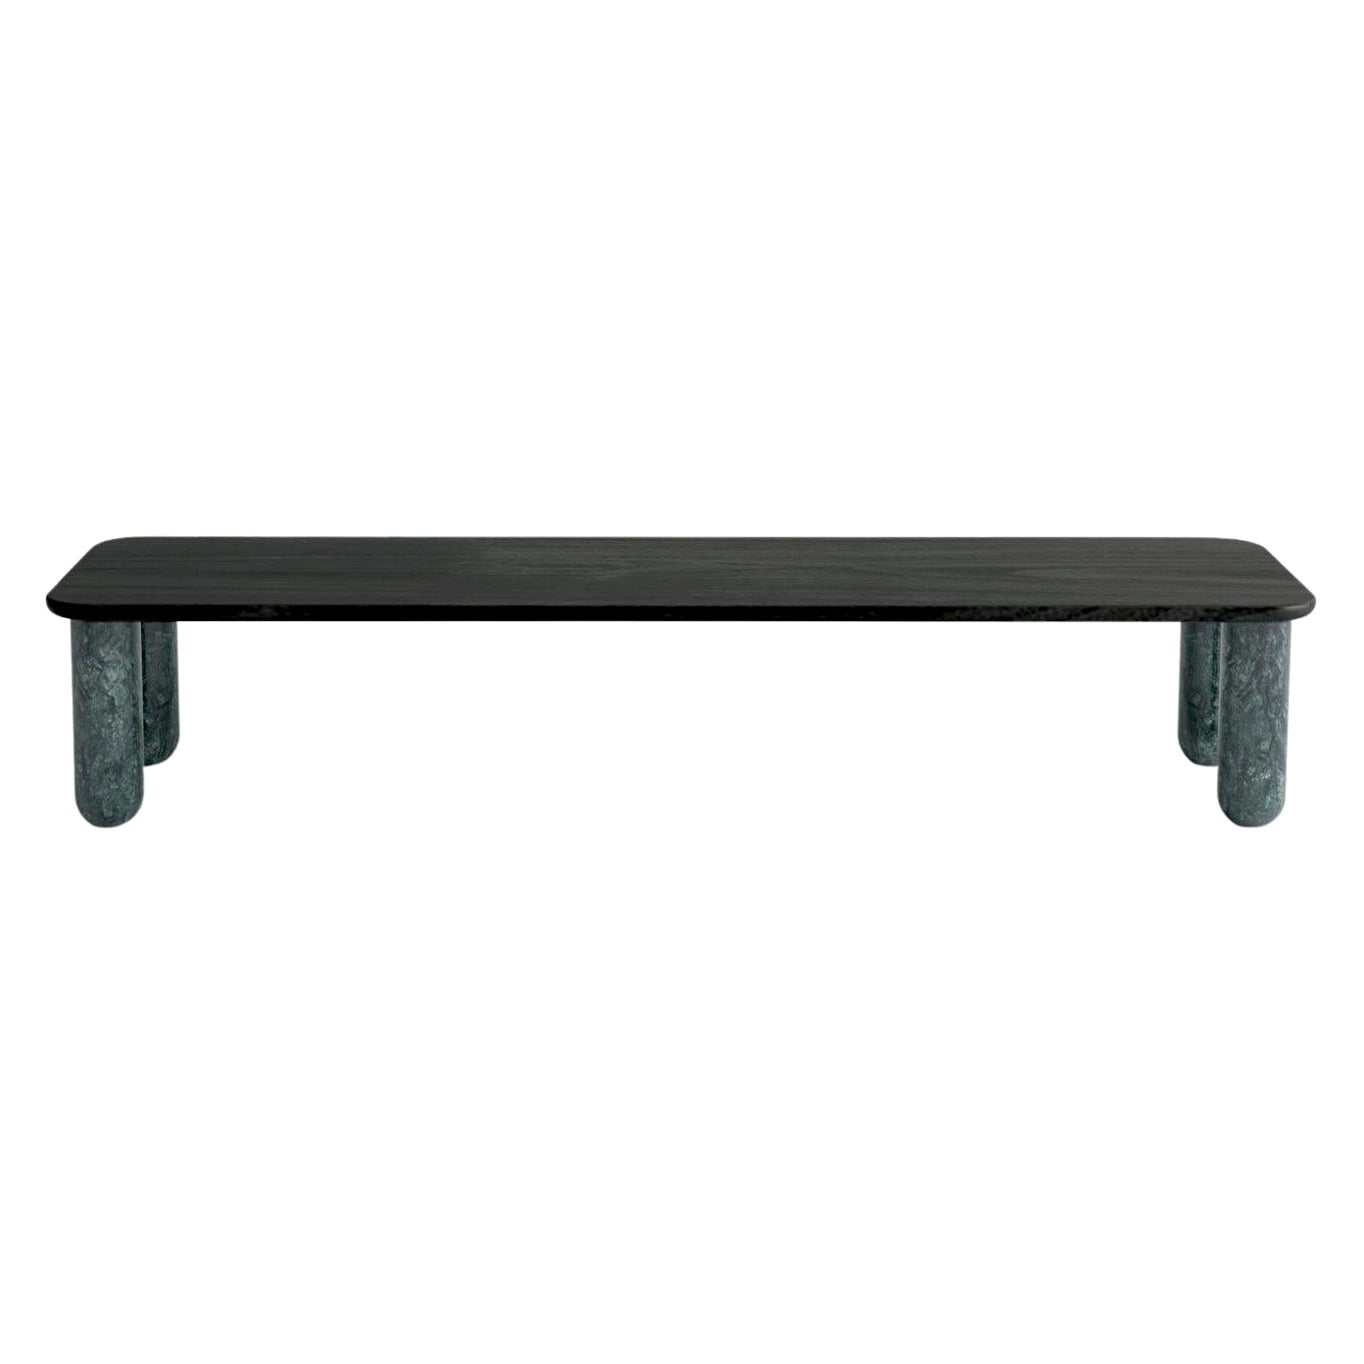 Large Black Wood and Green Marble "Sunday" Coffee Table, Jean-Baptiste Souletie For Sale